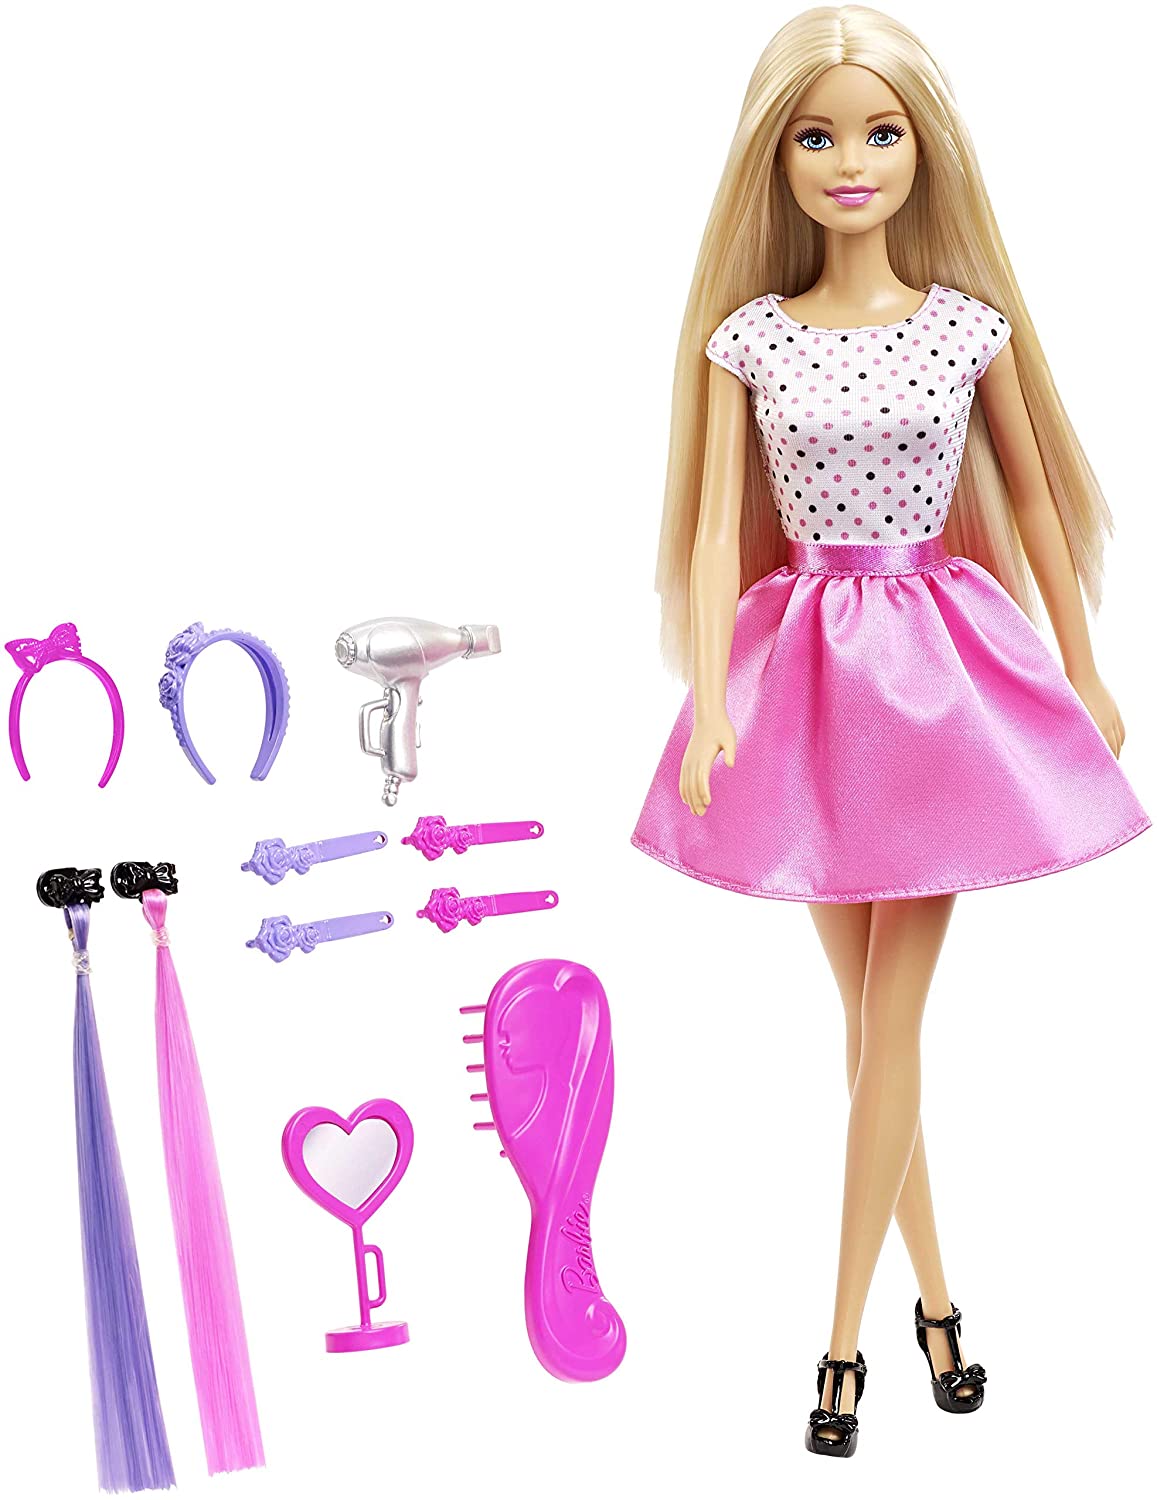 Barbie – DJP92 Doll & Playset with Hair Styling Accessories, Multi ...